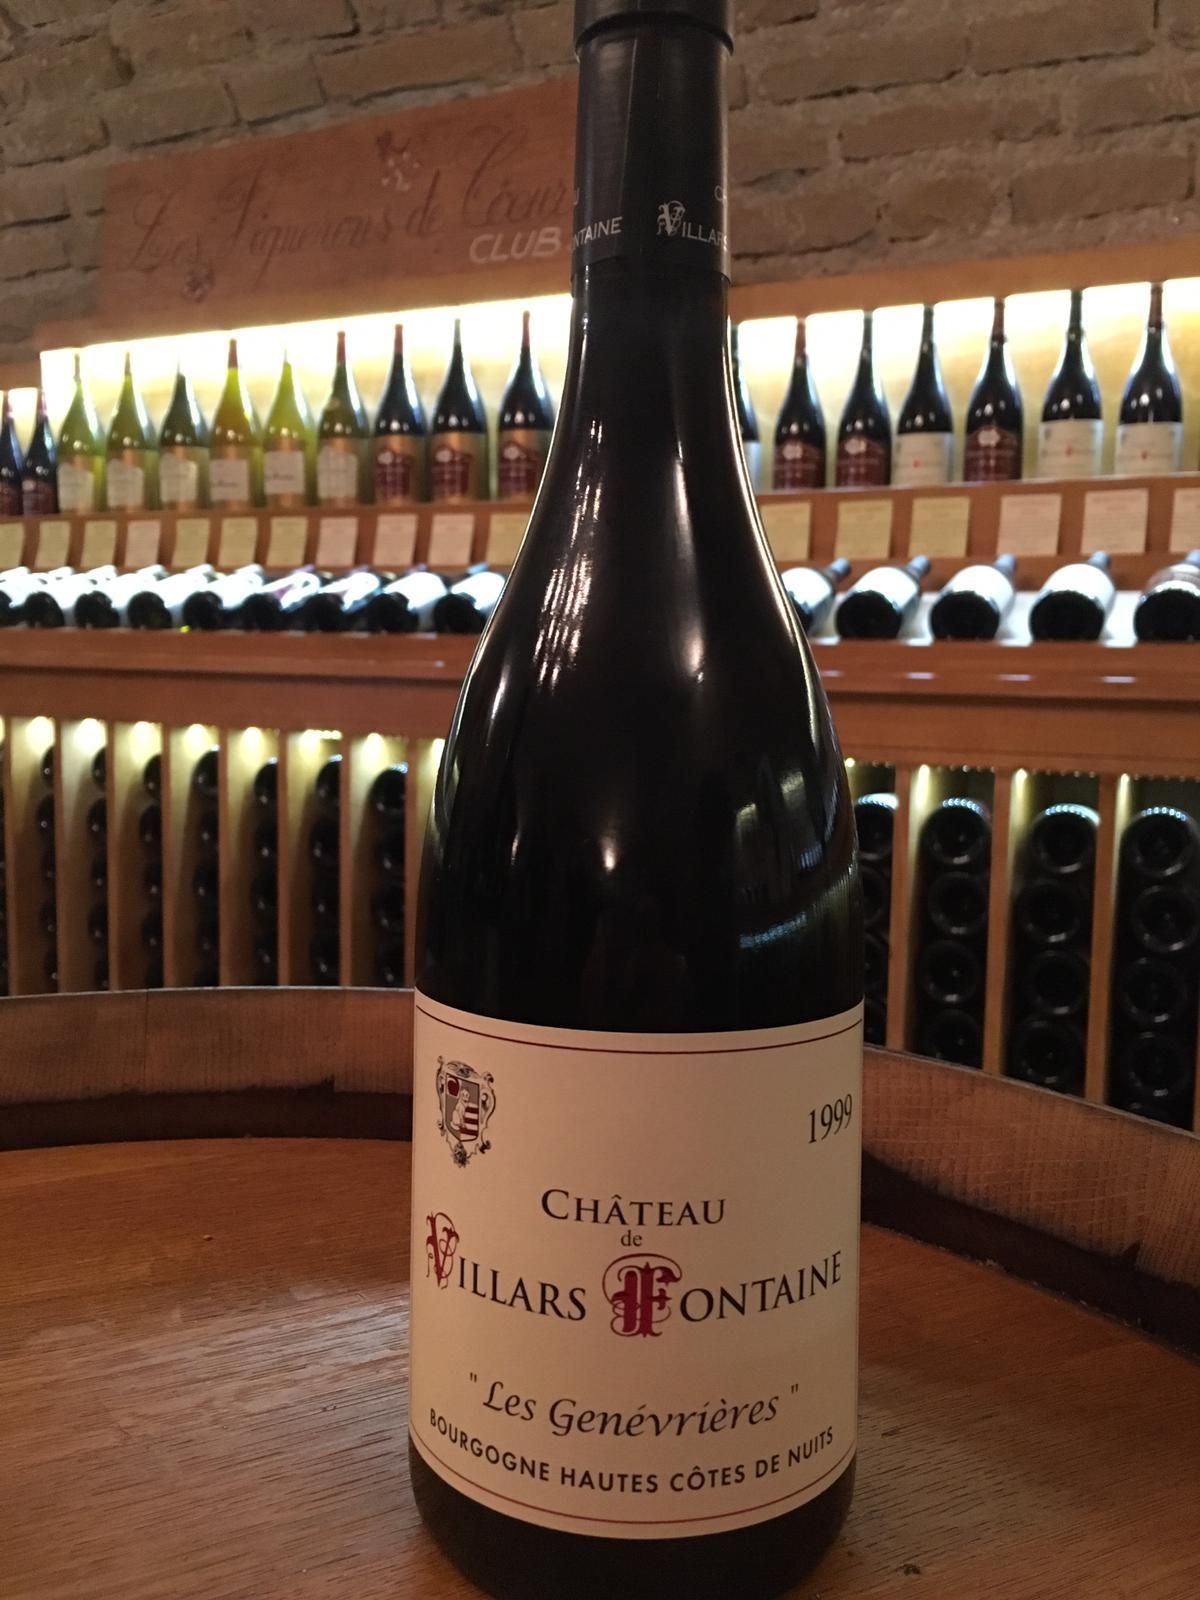 In the cellar of the Chateau:Best wines